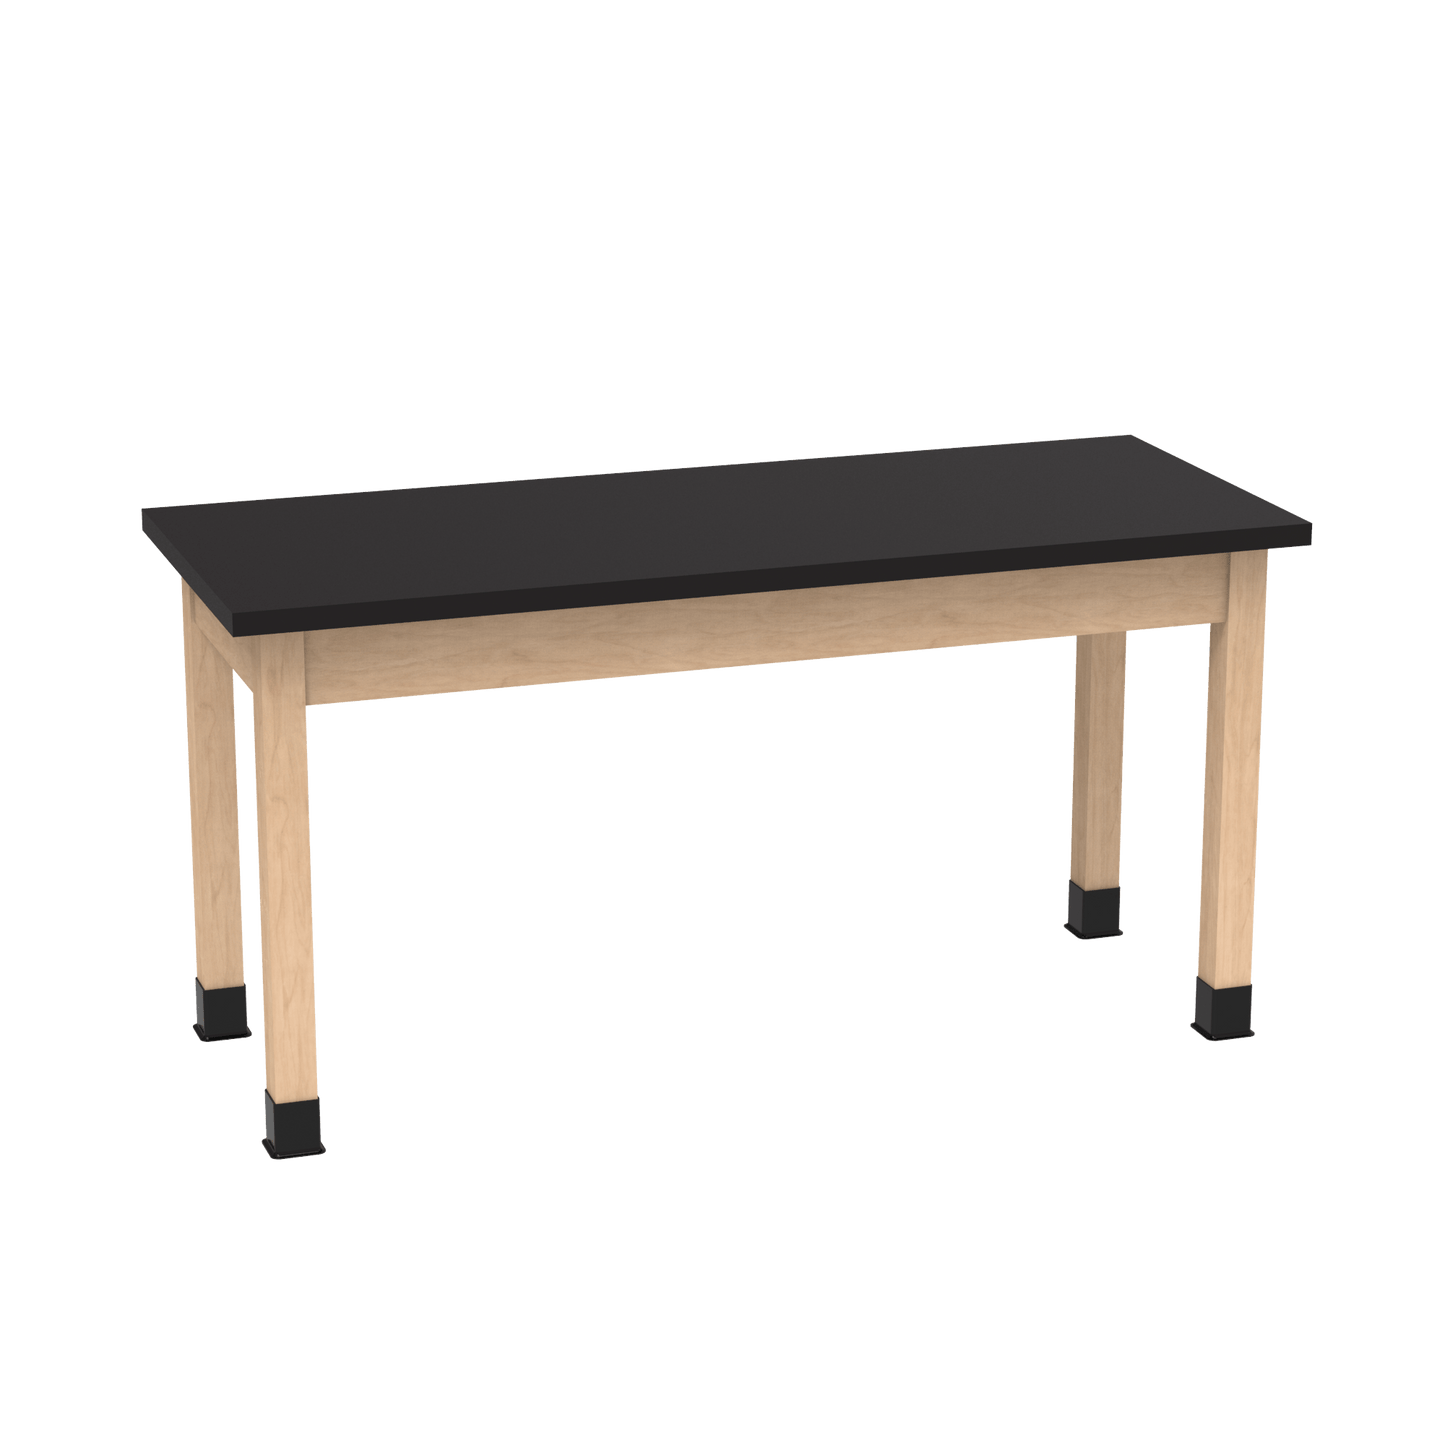 Diversified Woodcrafts Science Table - Plain Apron - 48" W x 36" D - Solid Wood Frame and Adjustable Glides - SchoolOutlet